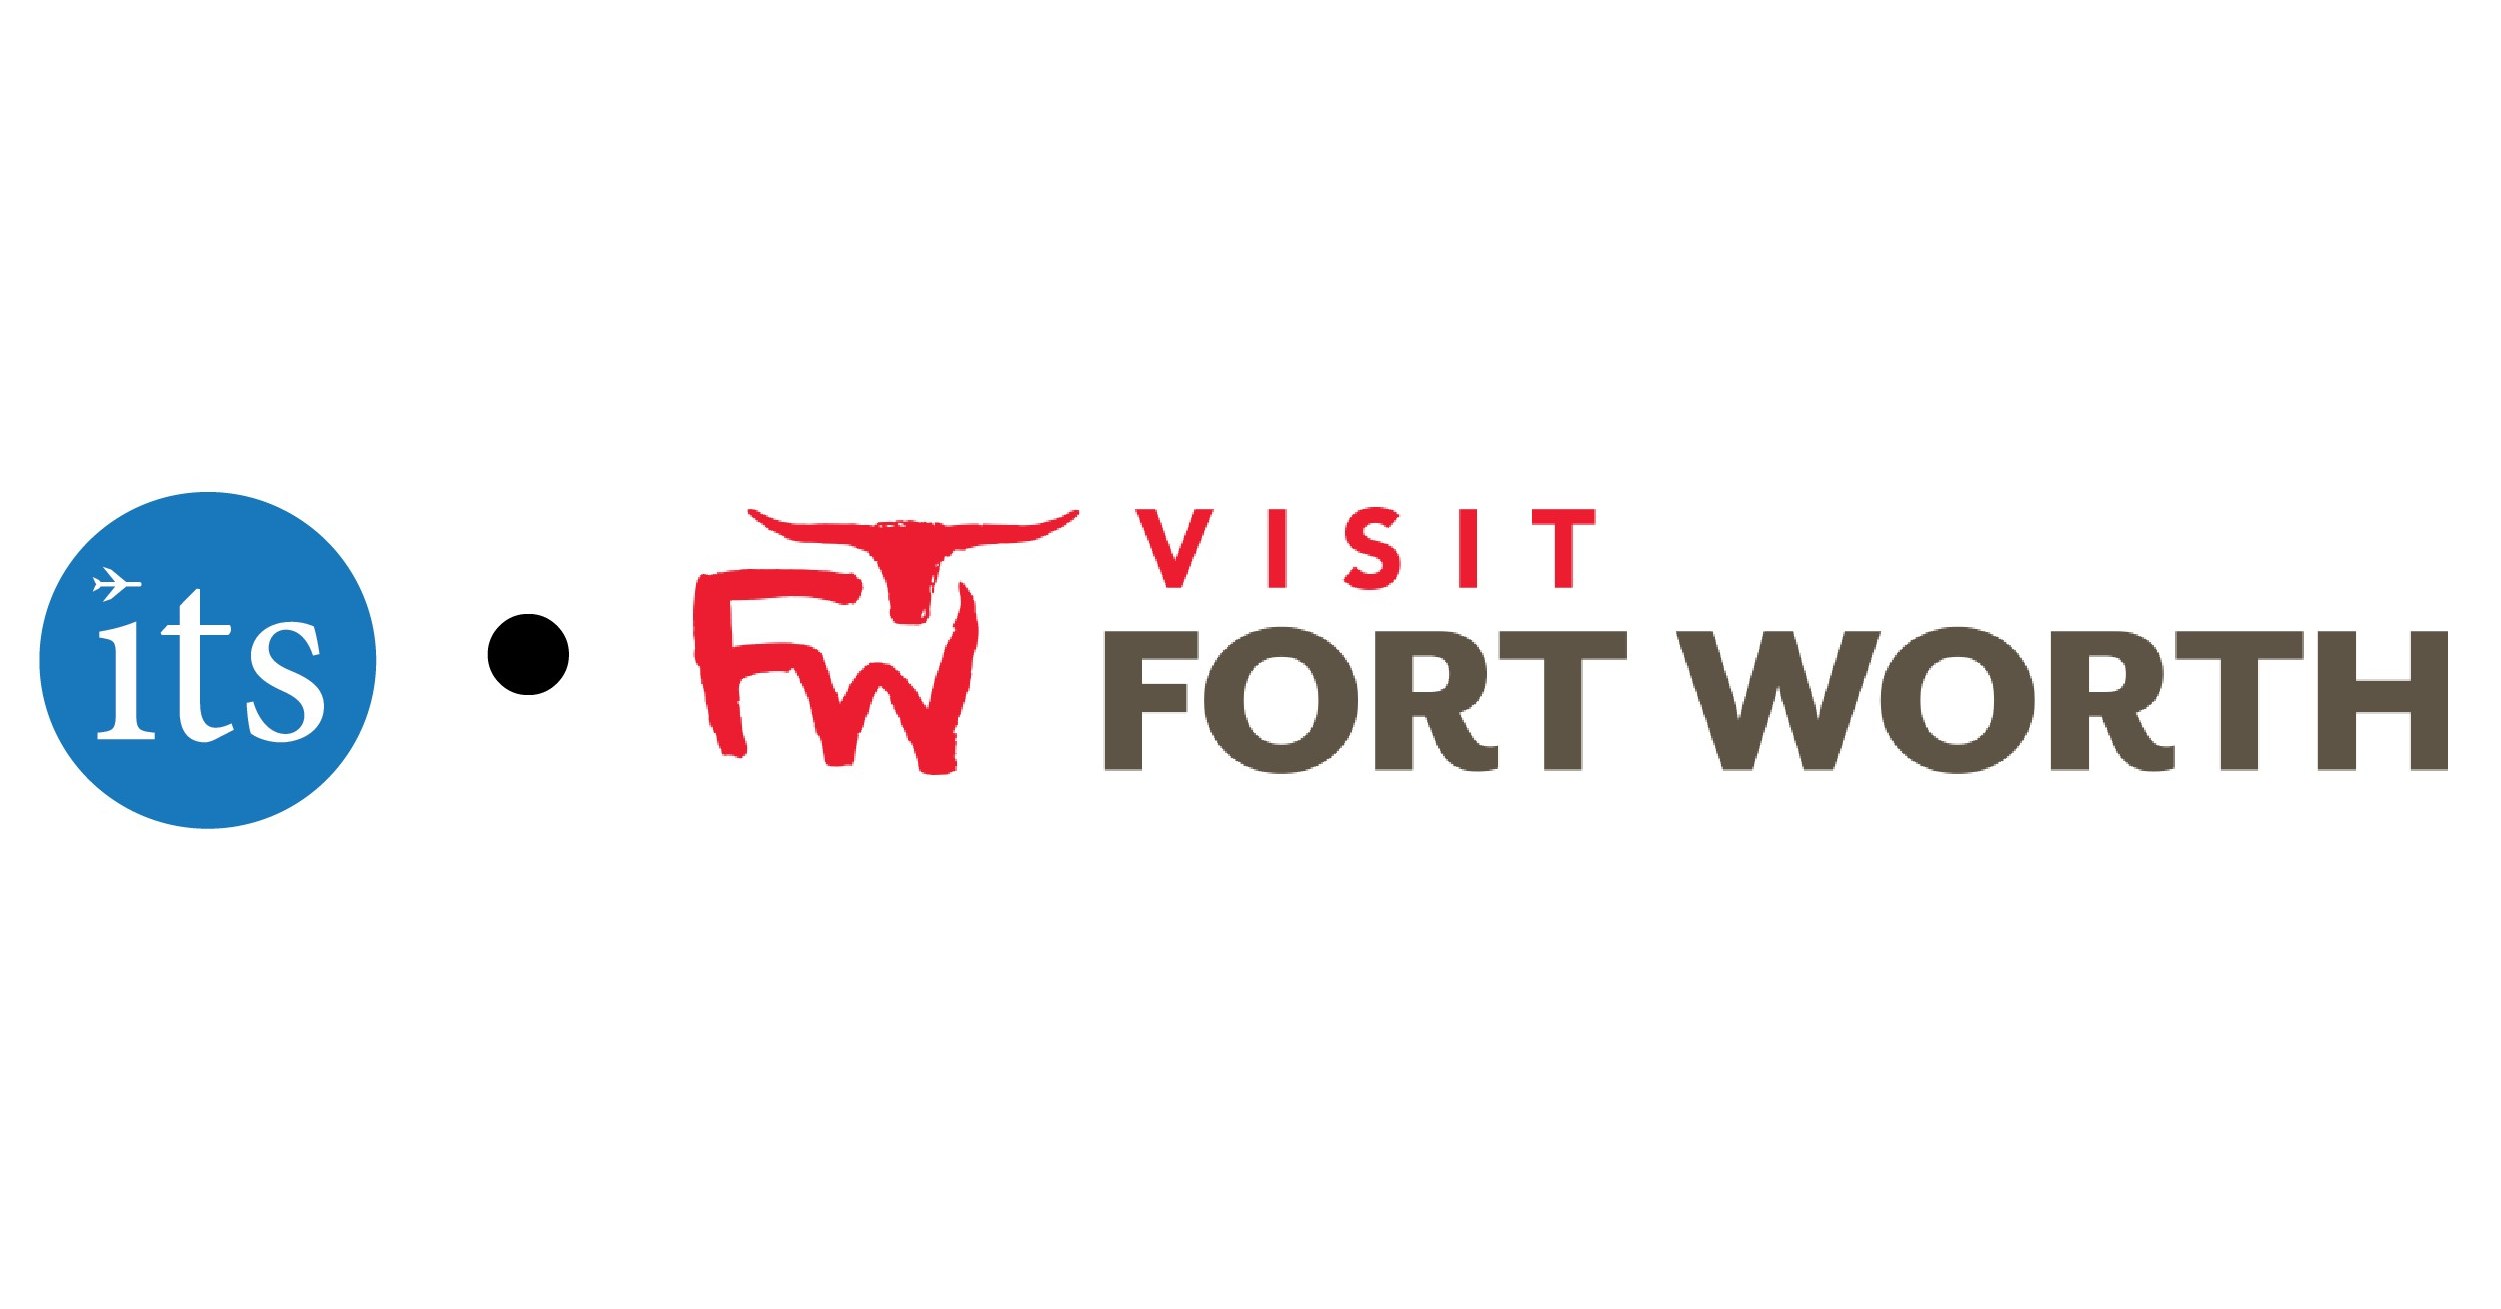 travel agency fort worth texas